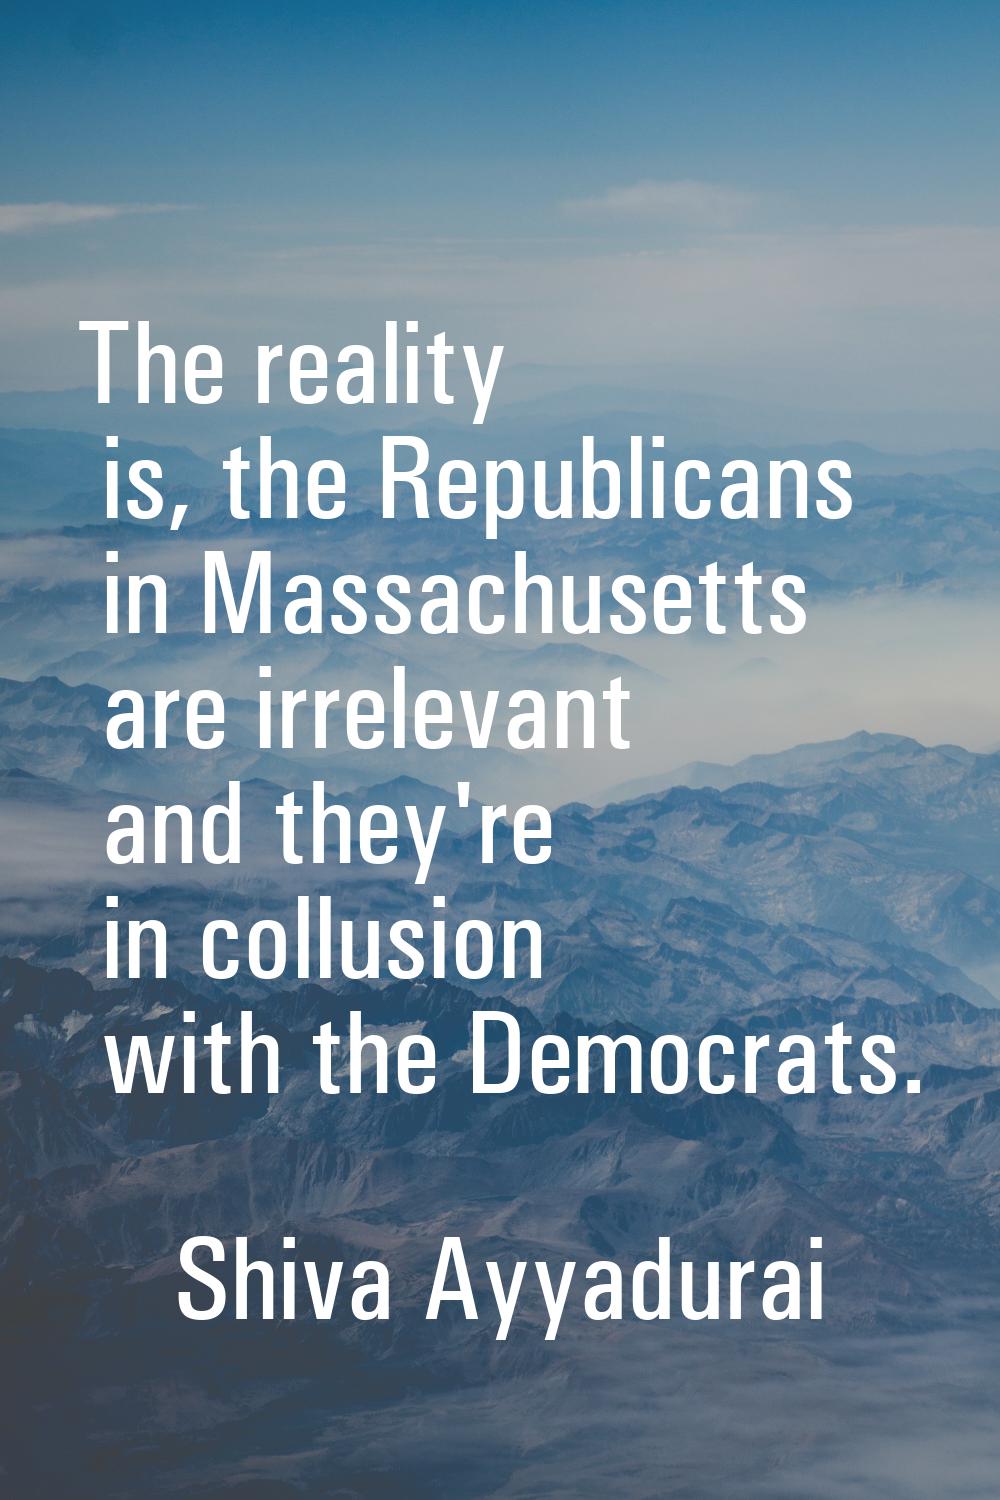 The reality is, the Republicans in Massachusetts are irrelevant and they're in collusion with the D